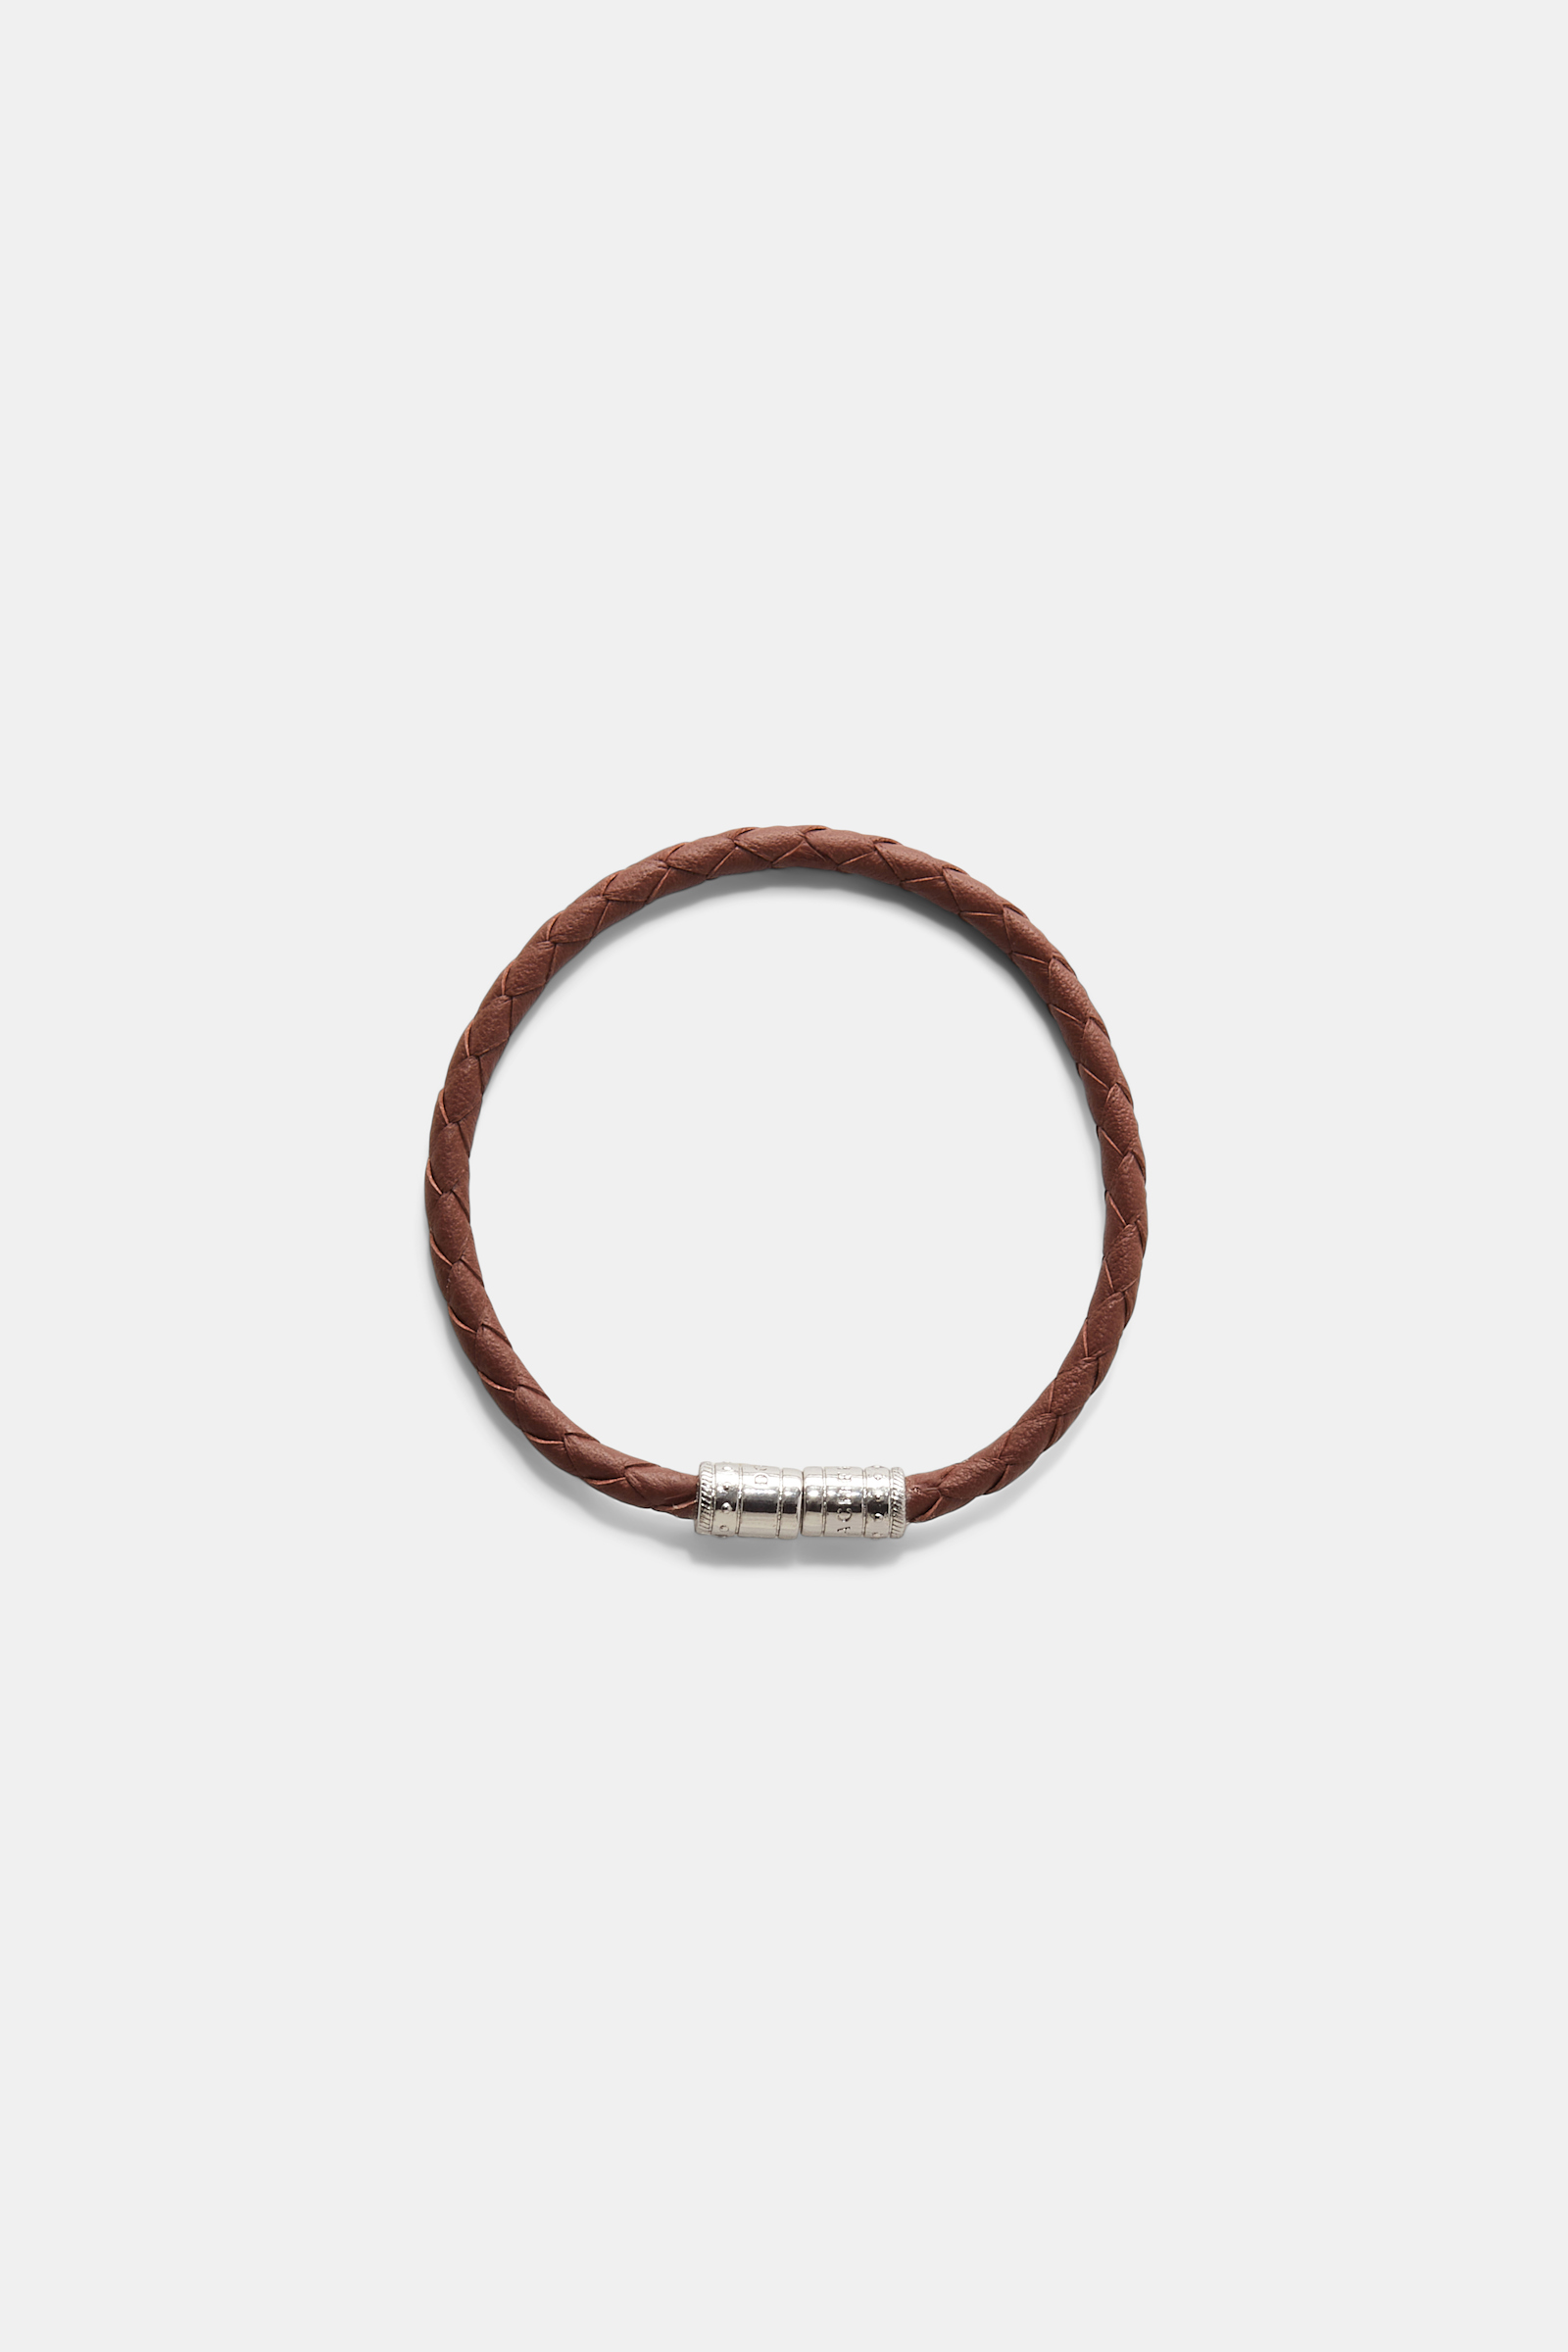 Dorothee Schumacher Set of three woven leather cord bracelets black & white with cognac mix